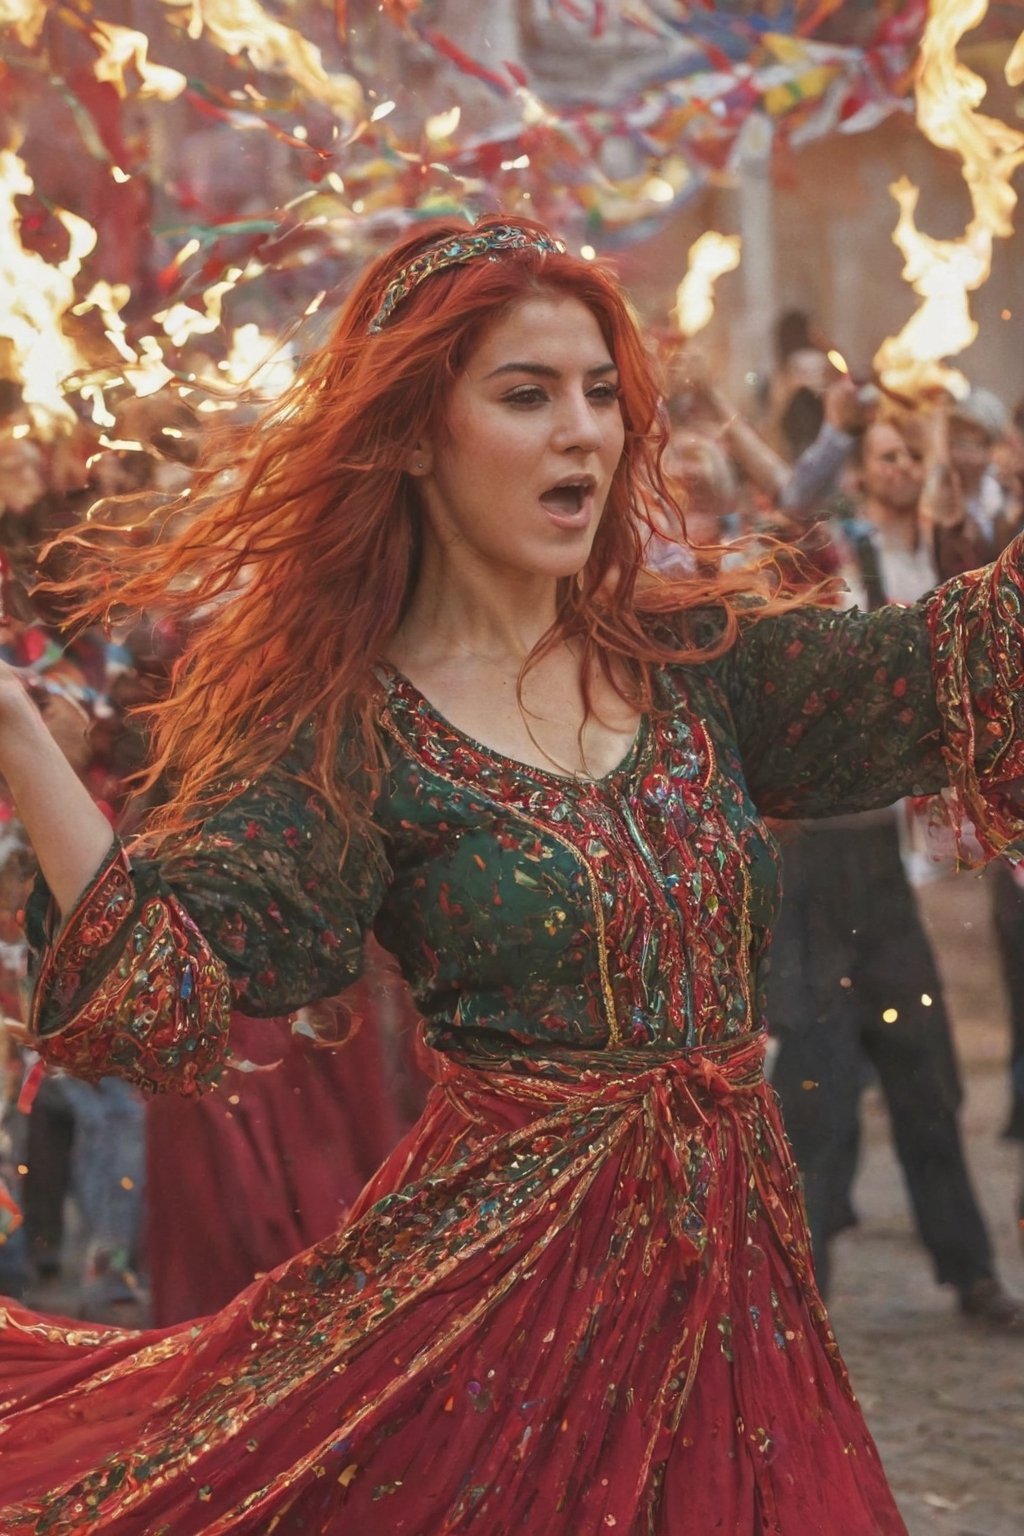 Generate hyper realistic image of a scene featuring a Persian woman in festive attire, her flame-red hair woven with ribbons. She dances amidst a lively celebration, the vibrant colors of her dress contrasting with the lively atmosphere of a traditional Nordic festival. upper body shot,Extremely Realistic